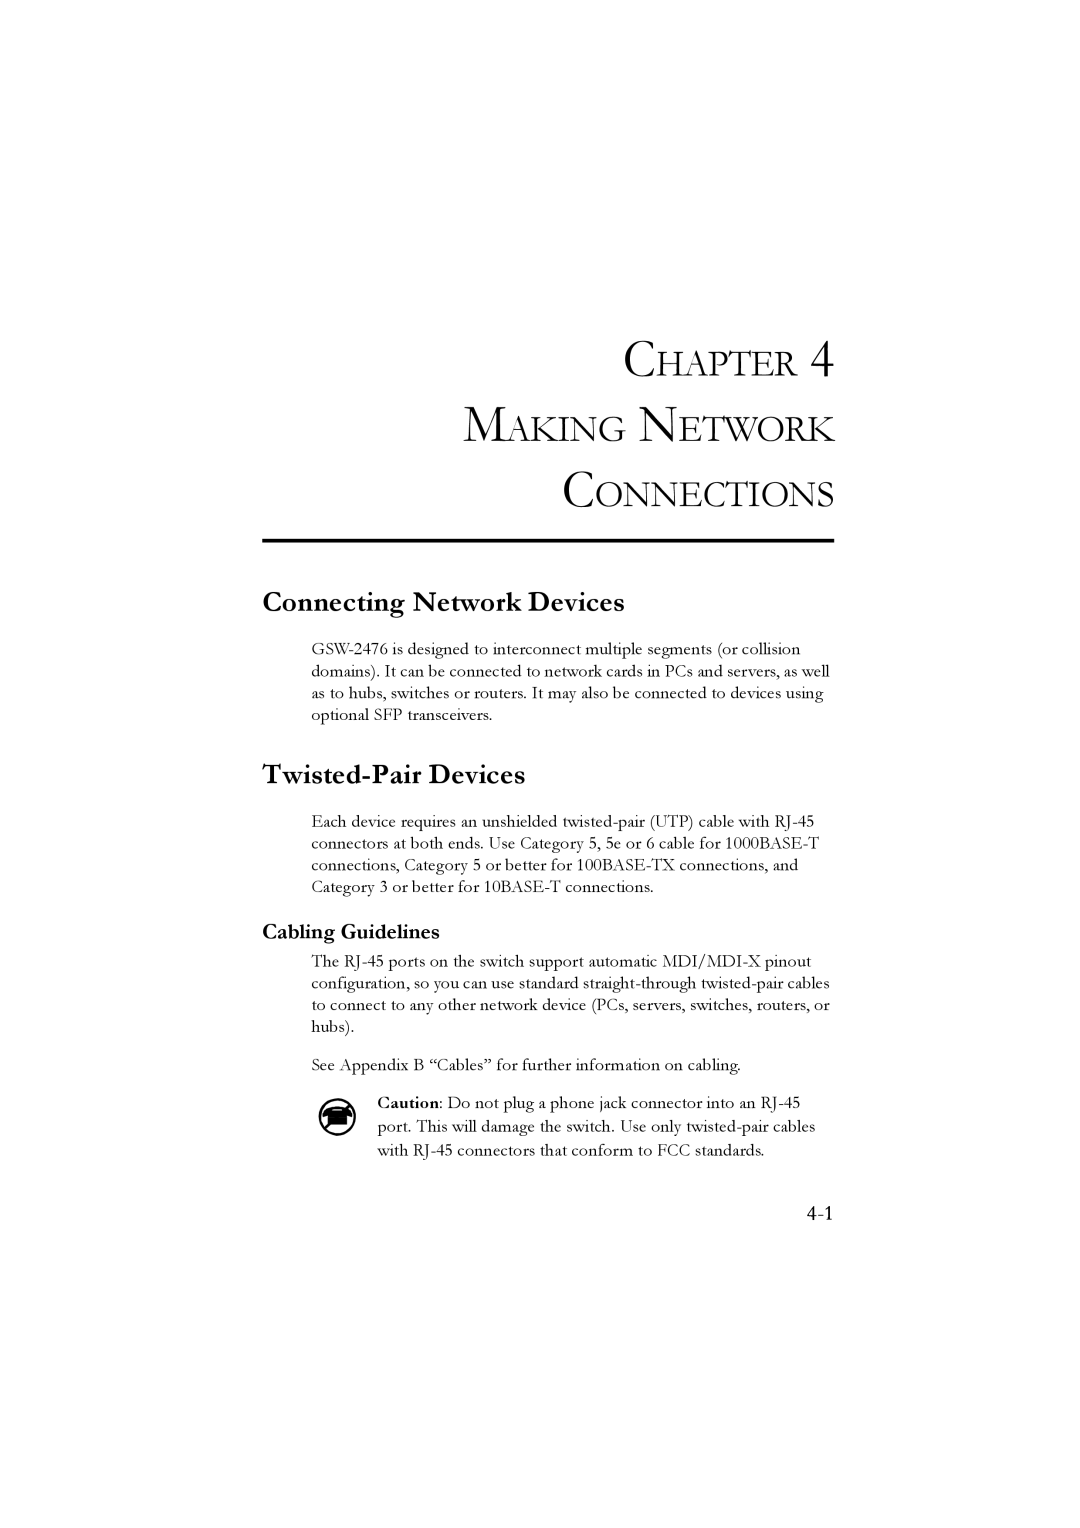 LevelOne GSW-2476 user manual Chapter Making Network Connections, Connecting Network Devices, Twisted-Pair Devices 